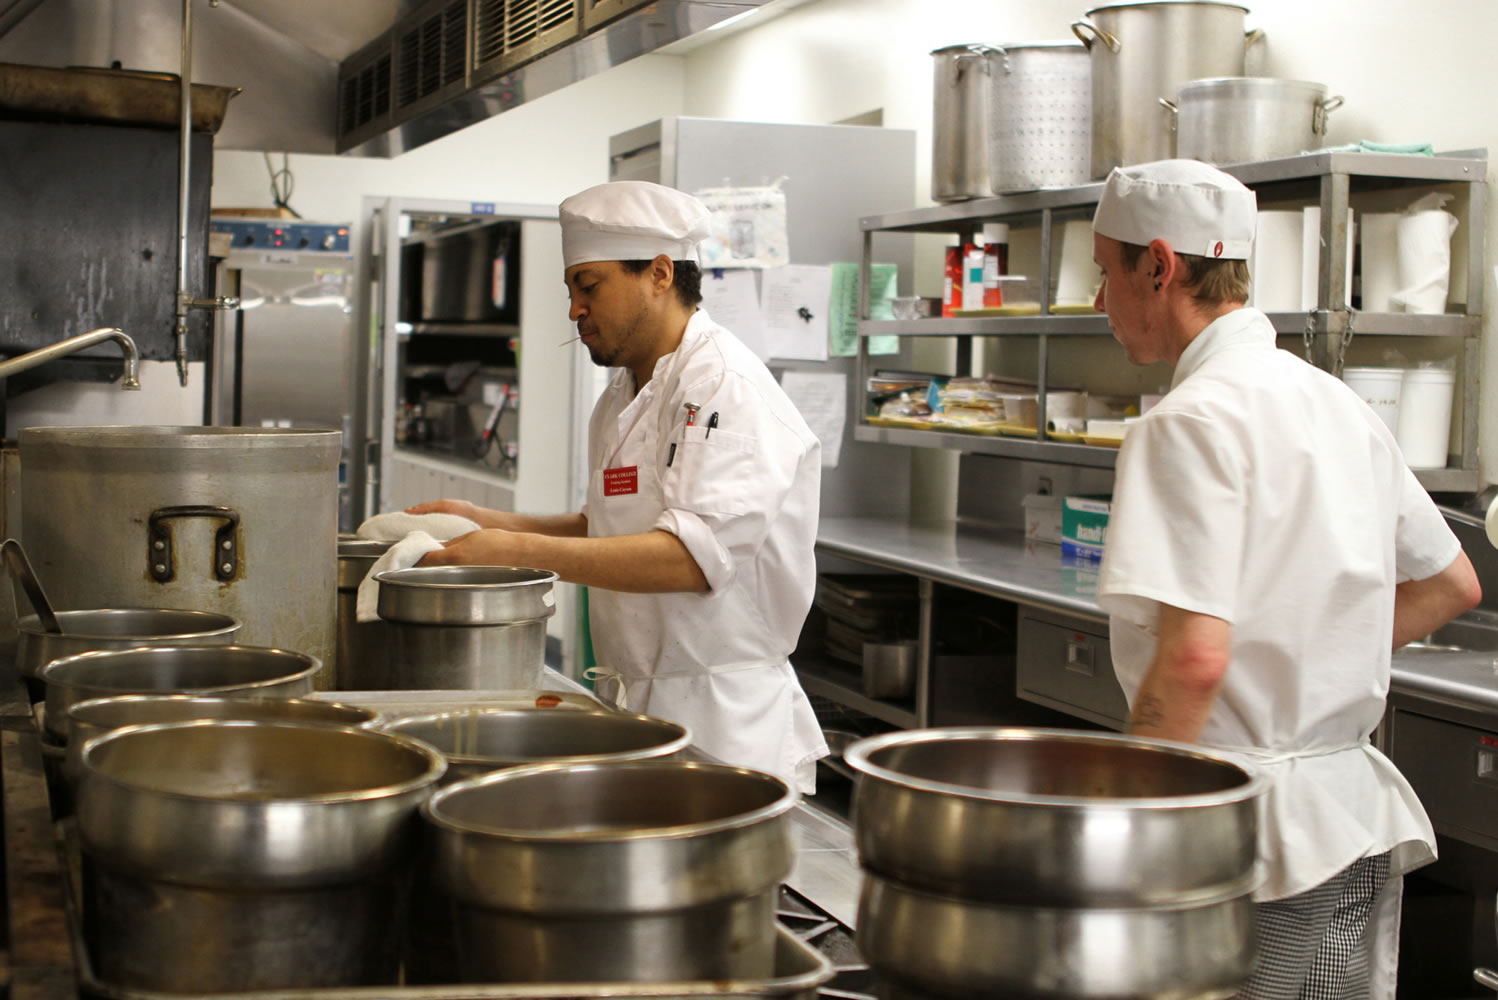 Clark College students Louis Cayson, left,  and Timothy Henley prepare food at the Clark College cafeteria.  The college's culinary arts program is undergoing a redesign that will change the curriculum and possibly upgrade dining and kitchen facilities.